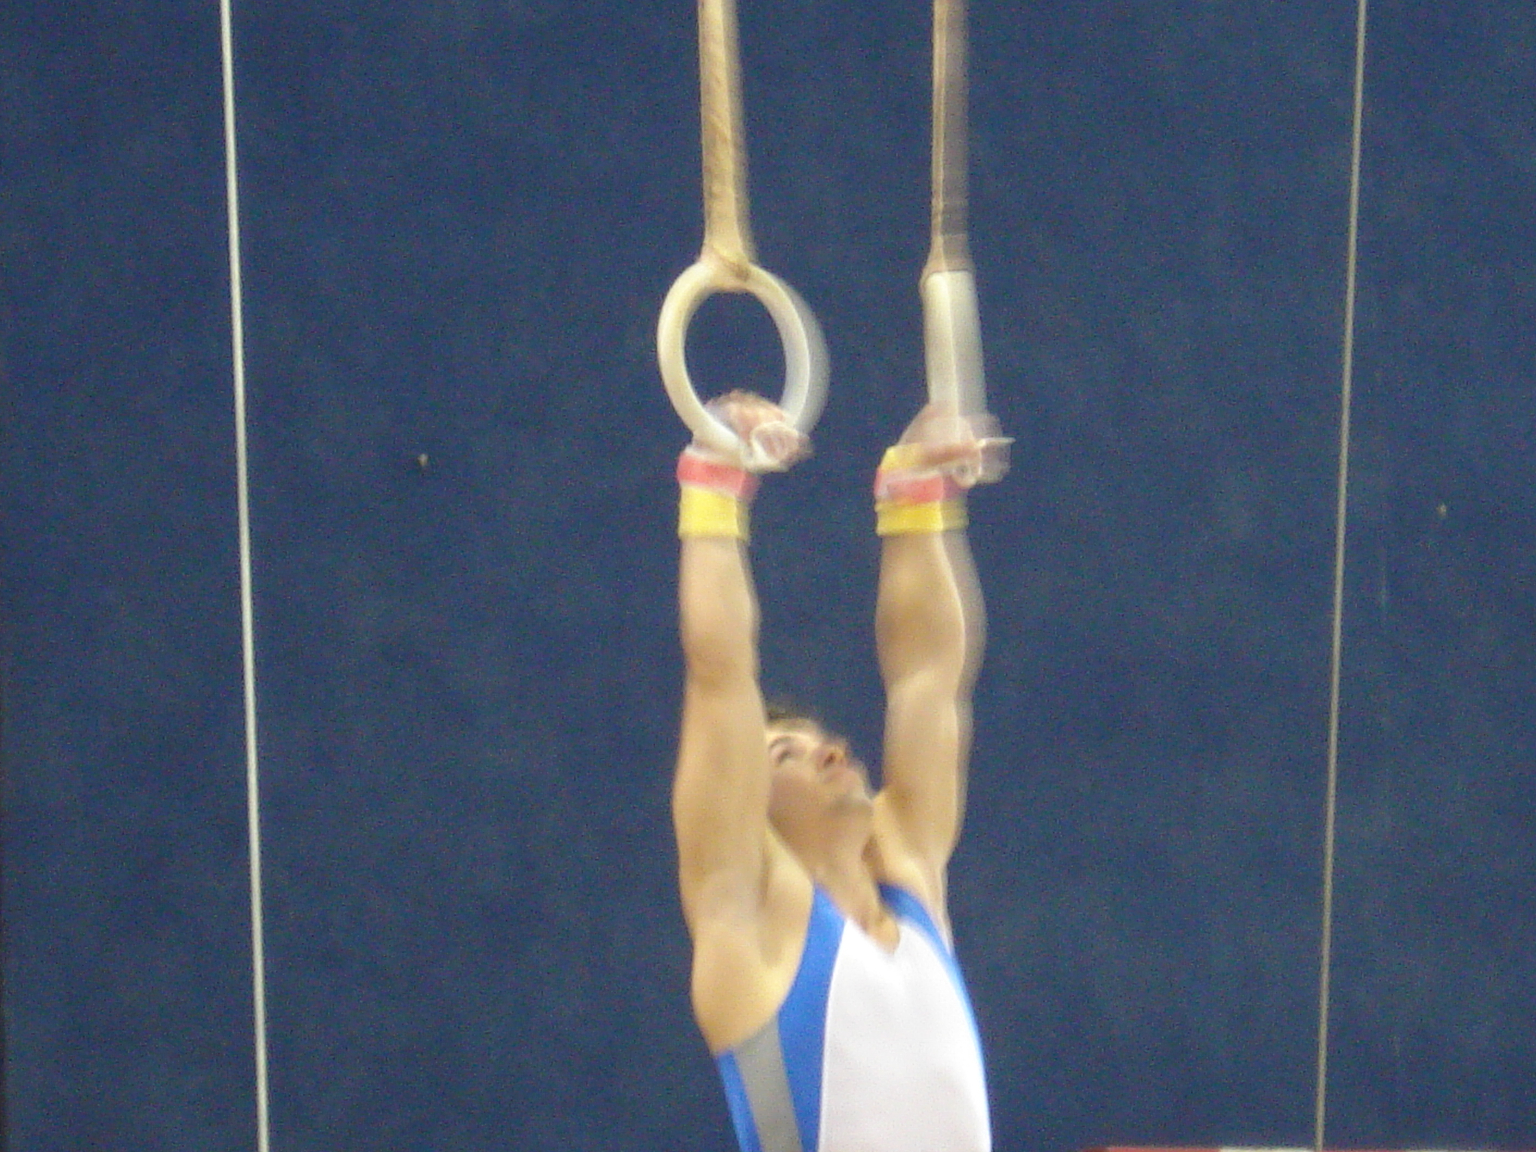 Men's Rings at the National Championships 2007